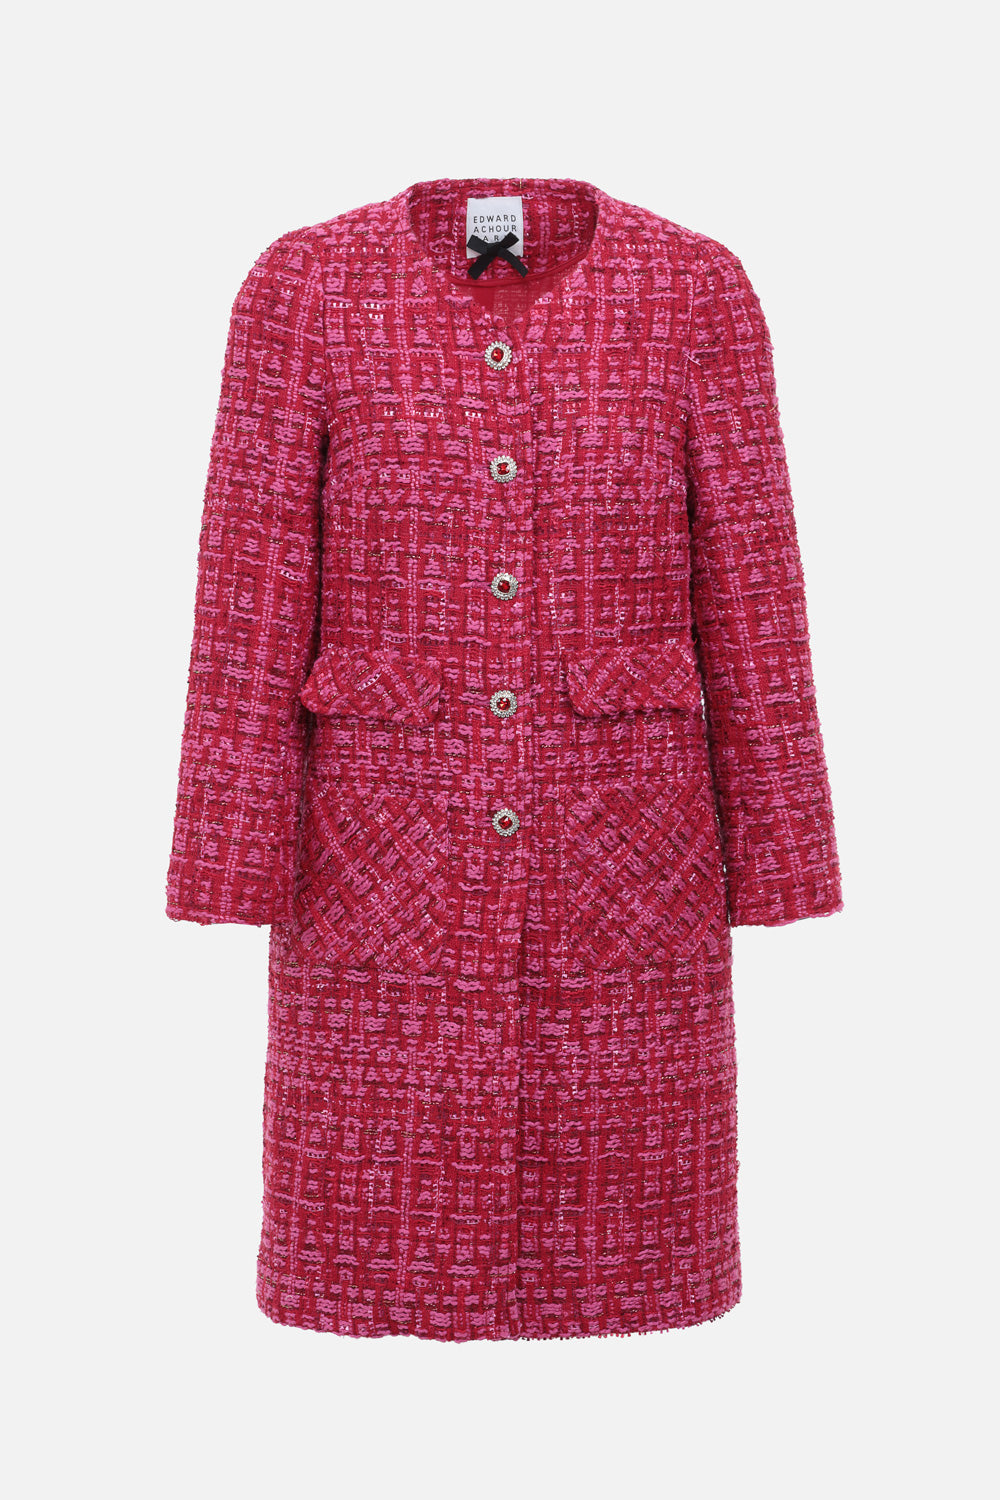 Tweed jacket red rose buttons rhinestone jewels buttons